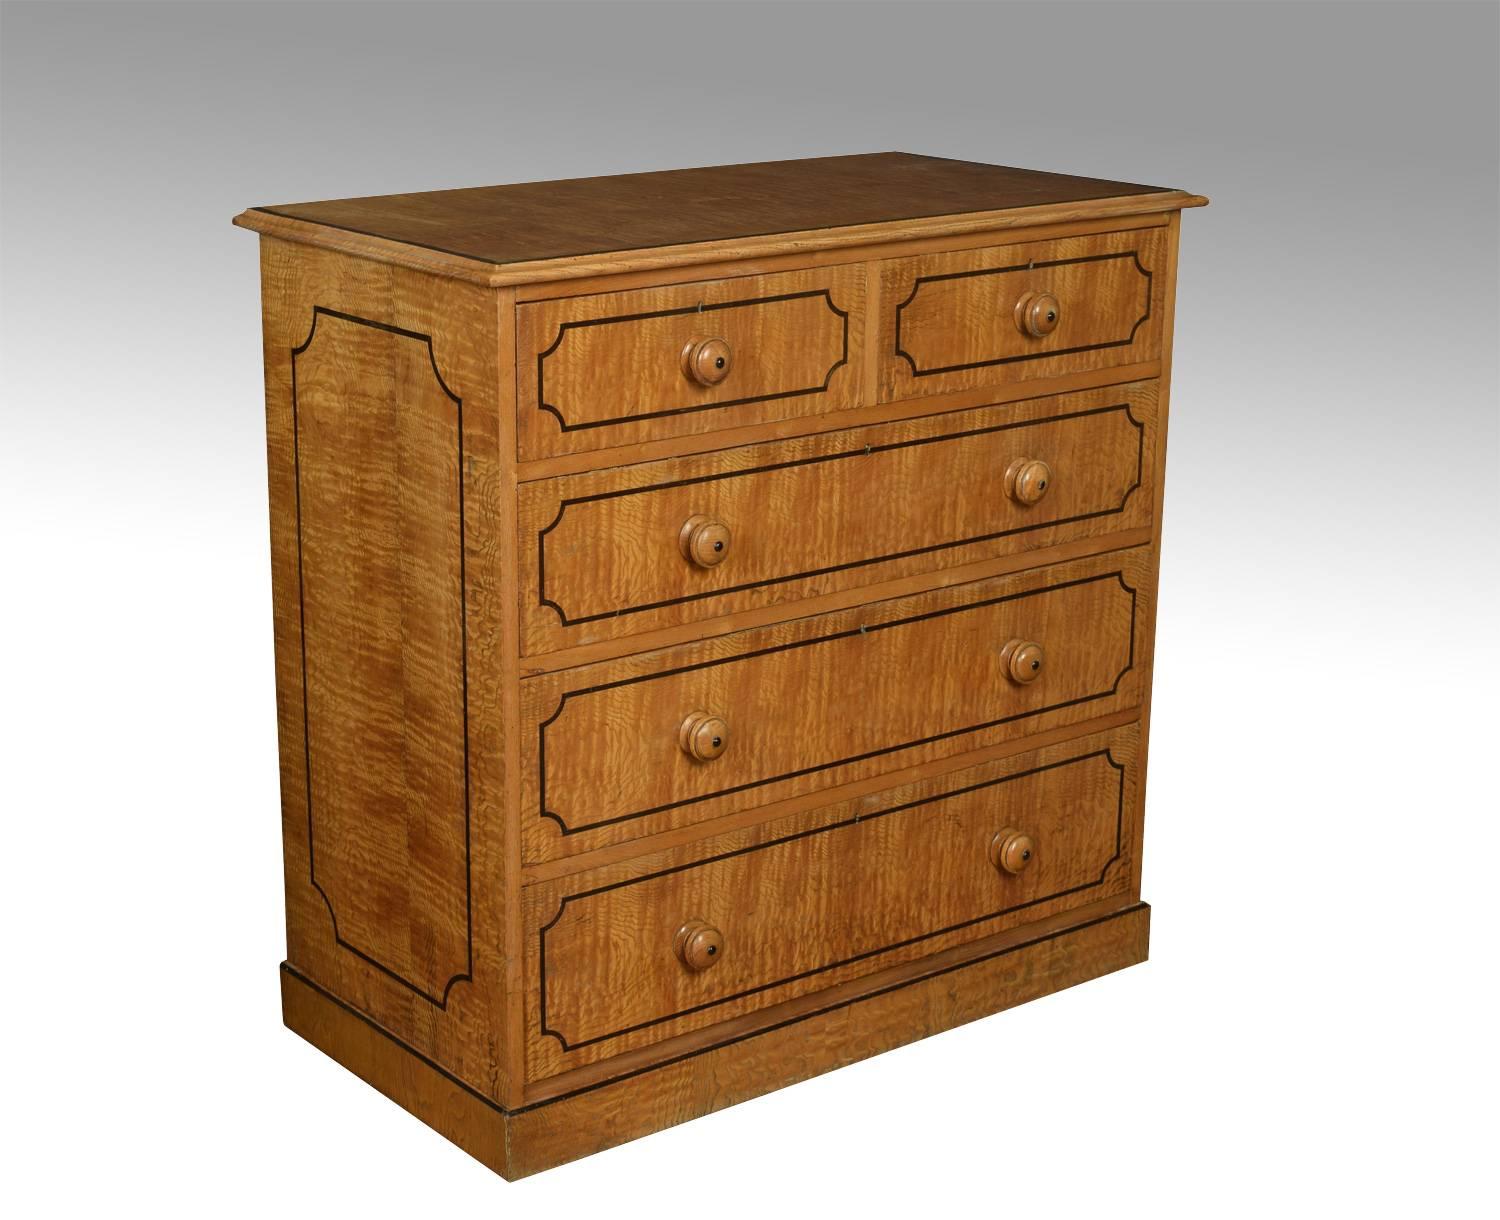 19th century ash chest of drawers, the large rectangular top with ebony banding above two short and three long graduated draws with turned handles and mahogany liners all raised up on plinth base

Dimensions:
Height 41.5 inches,
width 42